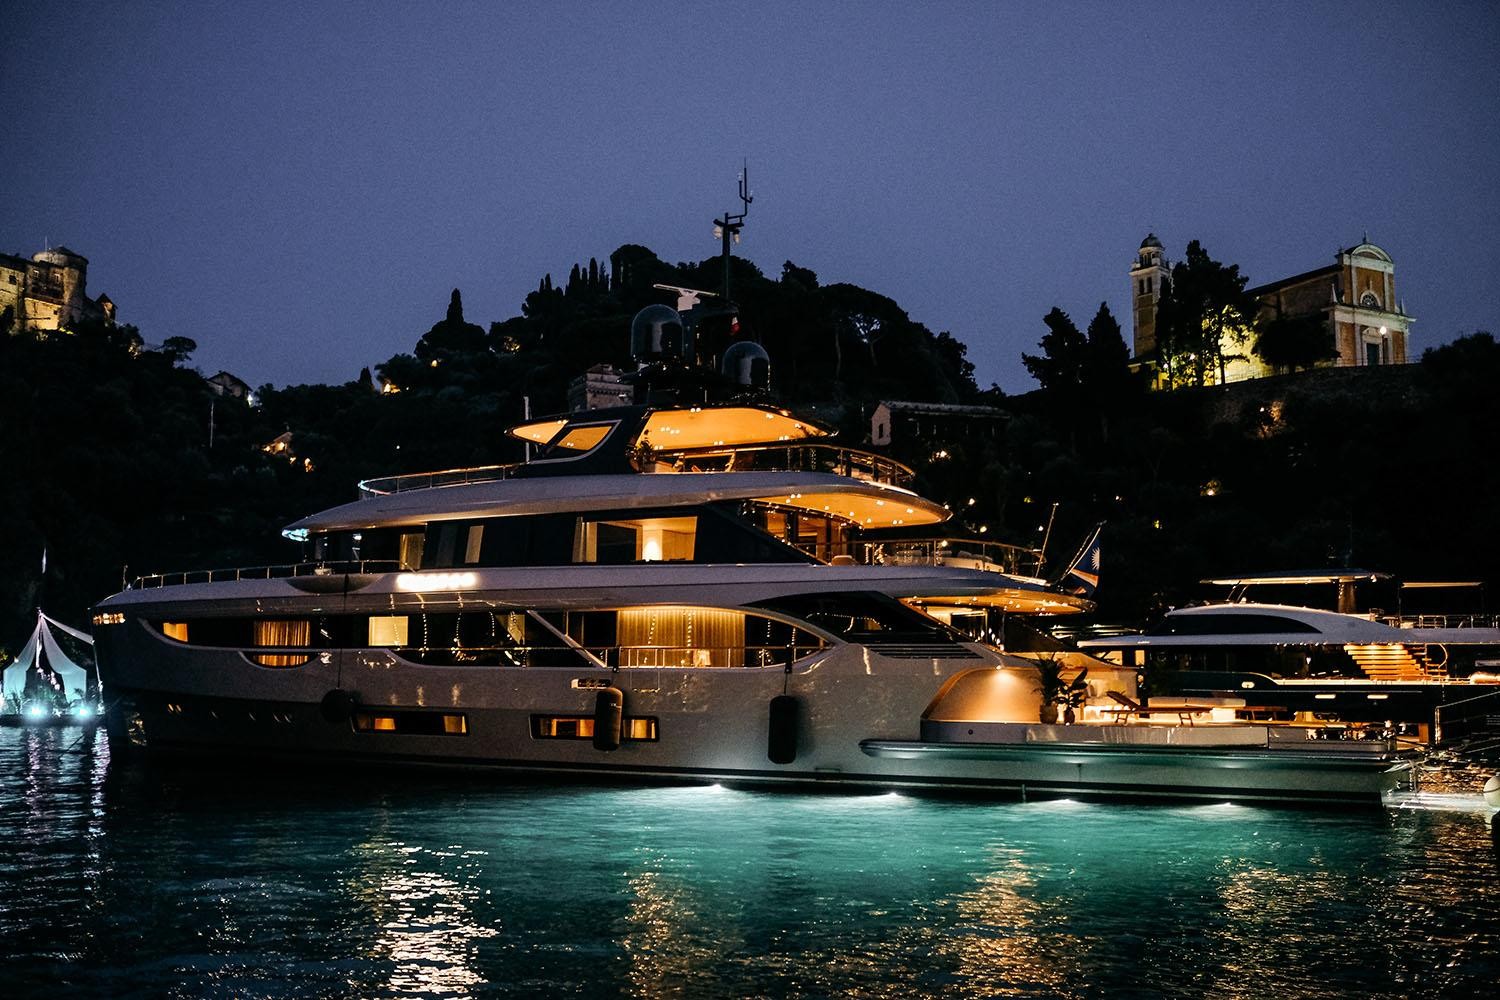 Benetti: Oasis 40m reveals the brand’s most glamorous side